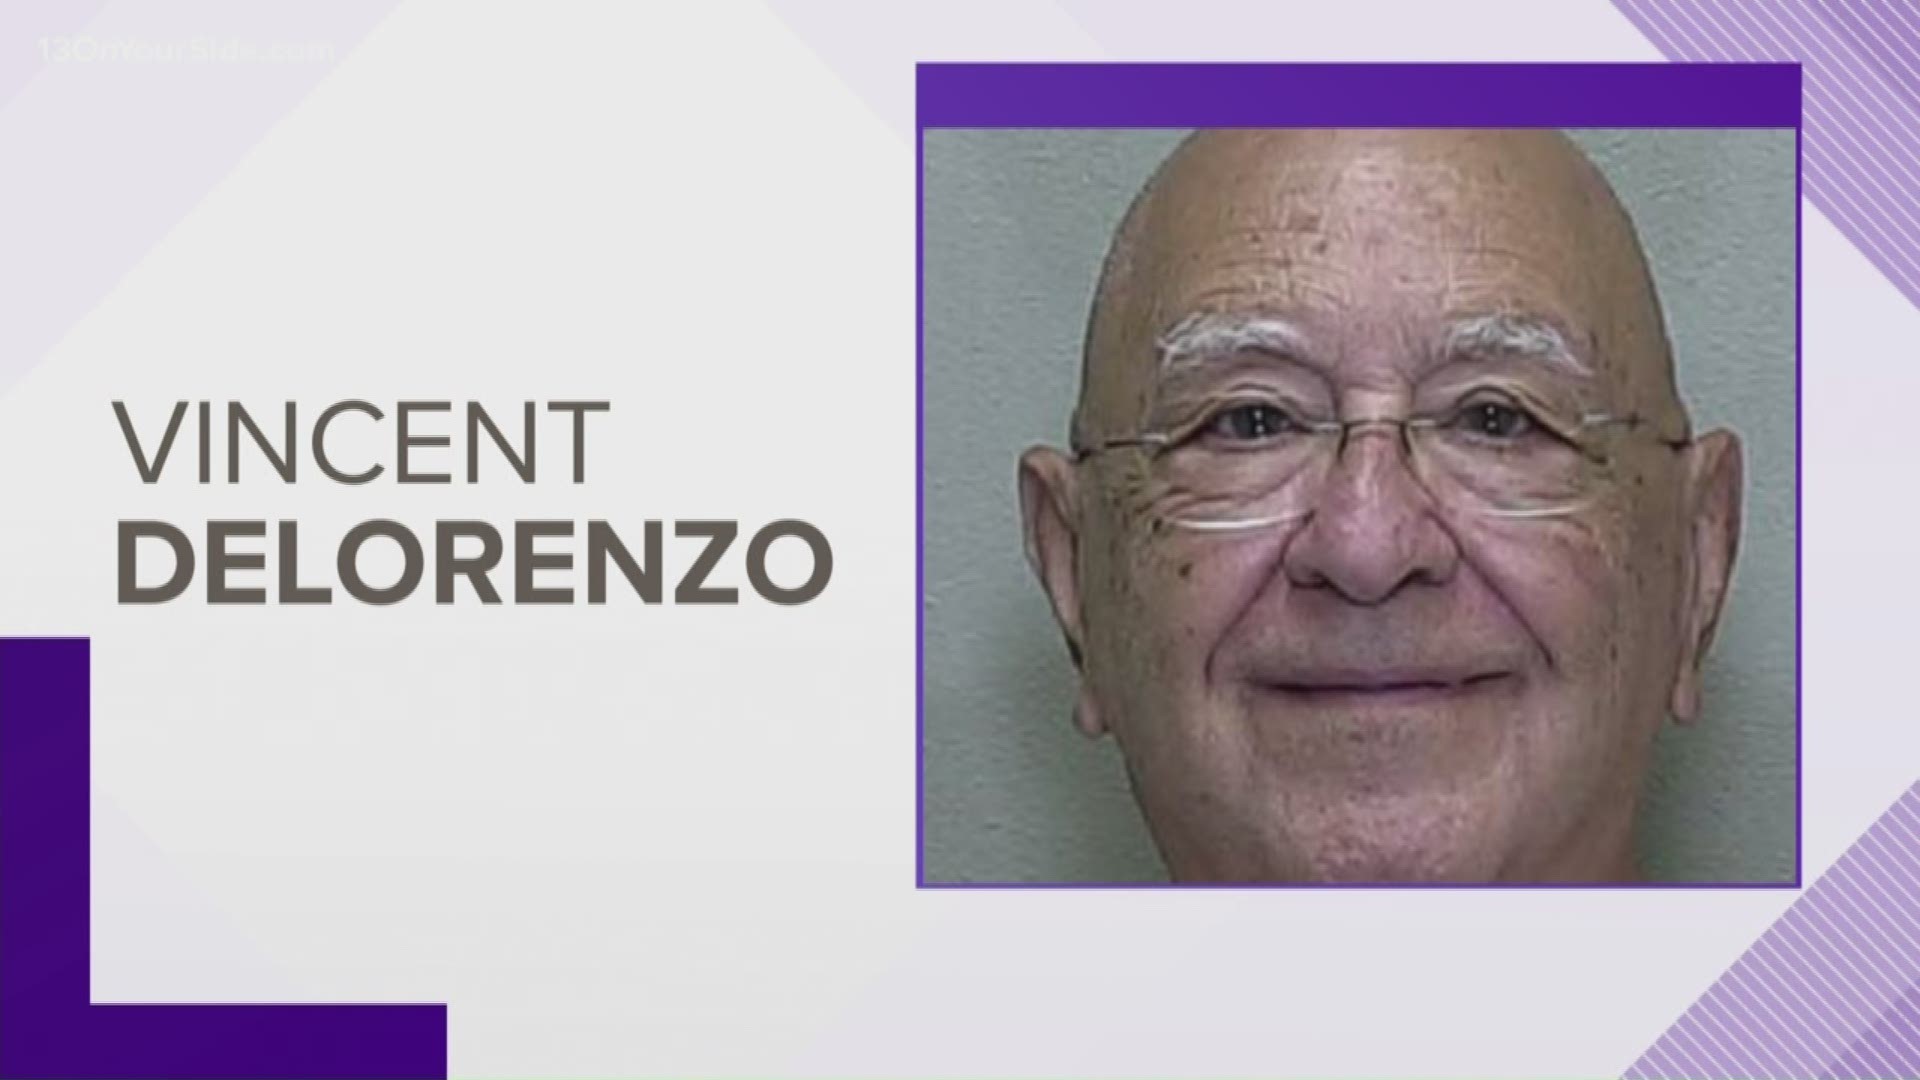 Vincent DeLorenzo was among sixth priests charged by Michigan Attorney General Dana Nessel, as part of an ongoing investigation into clergy abuse within the church.